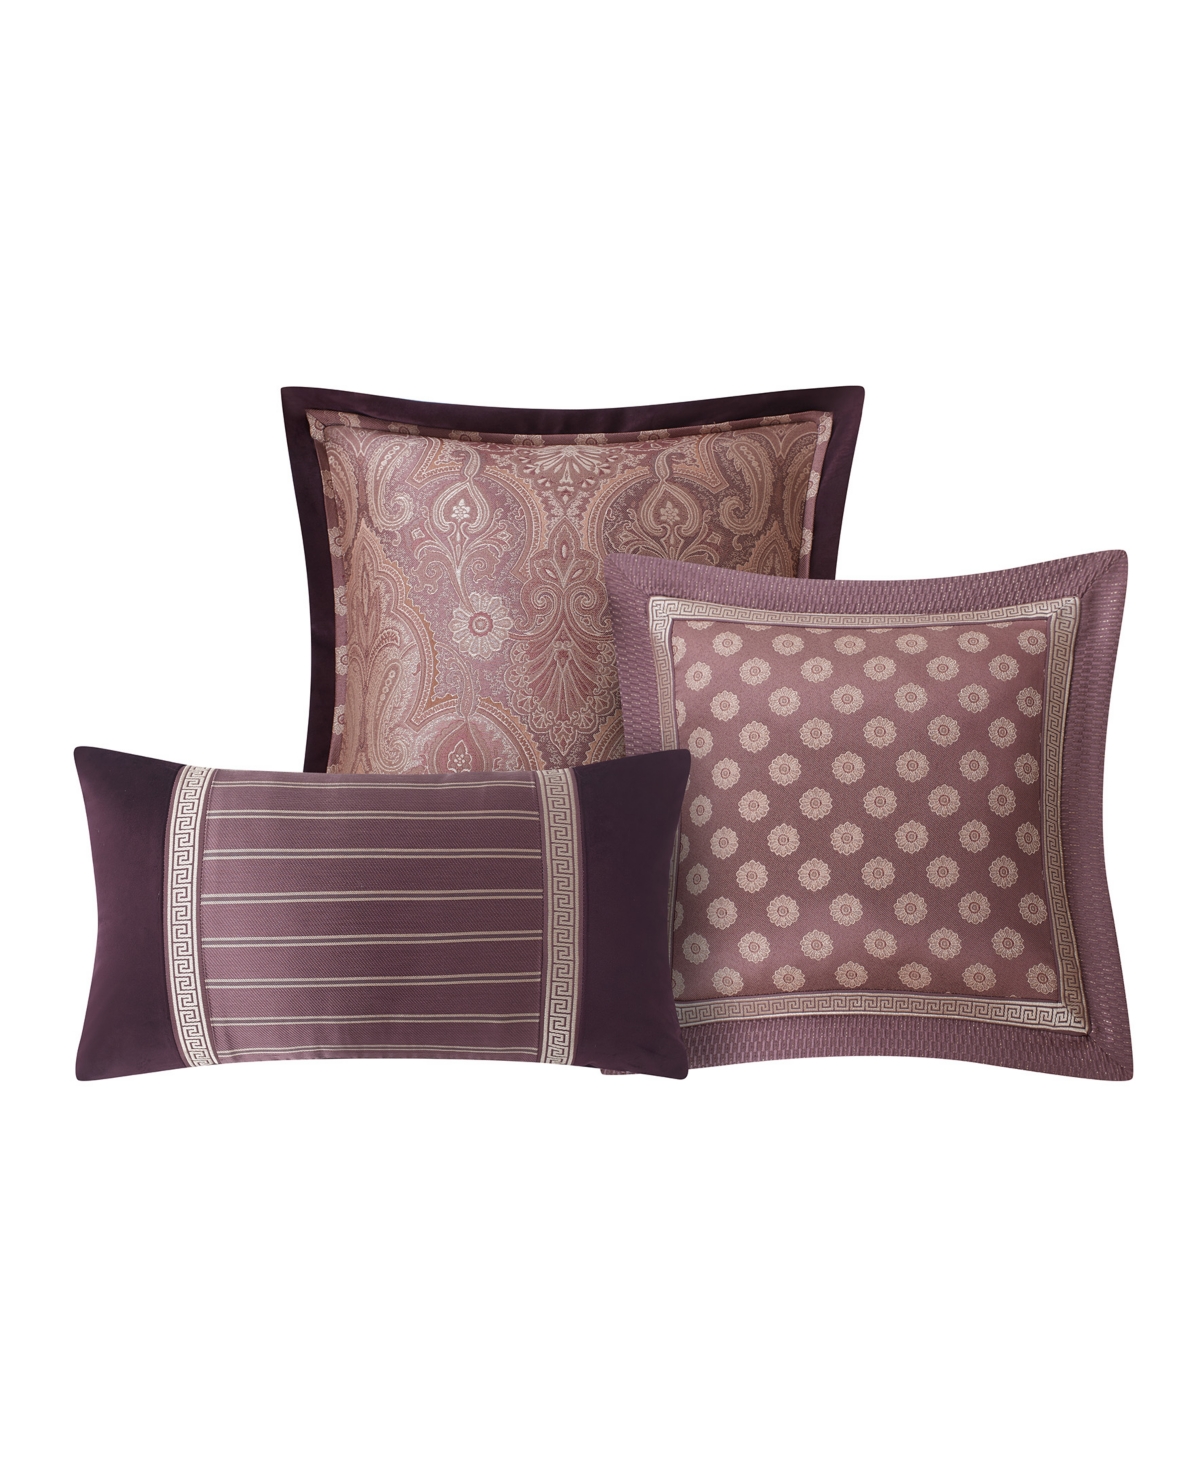 Waterford Set Of 3 Tabriz Decorative Pillows In Wine